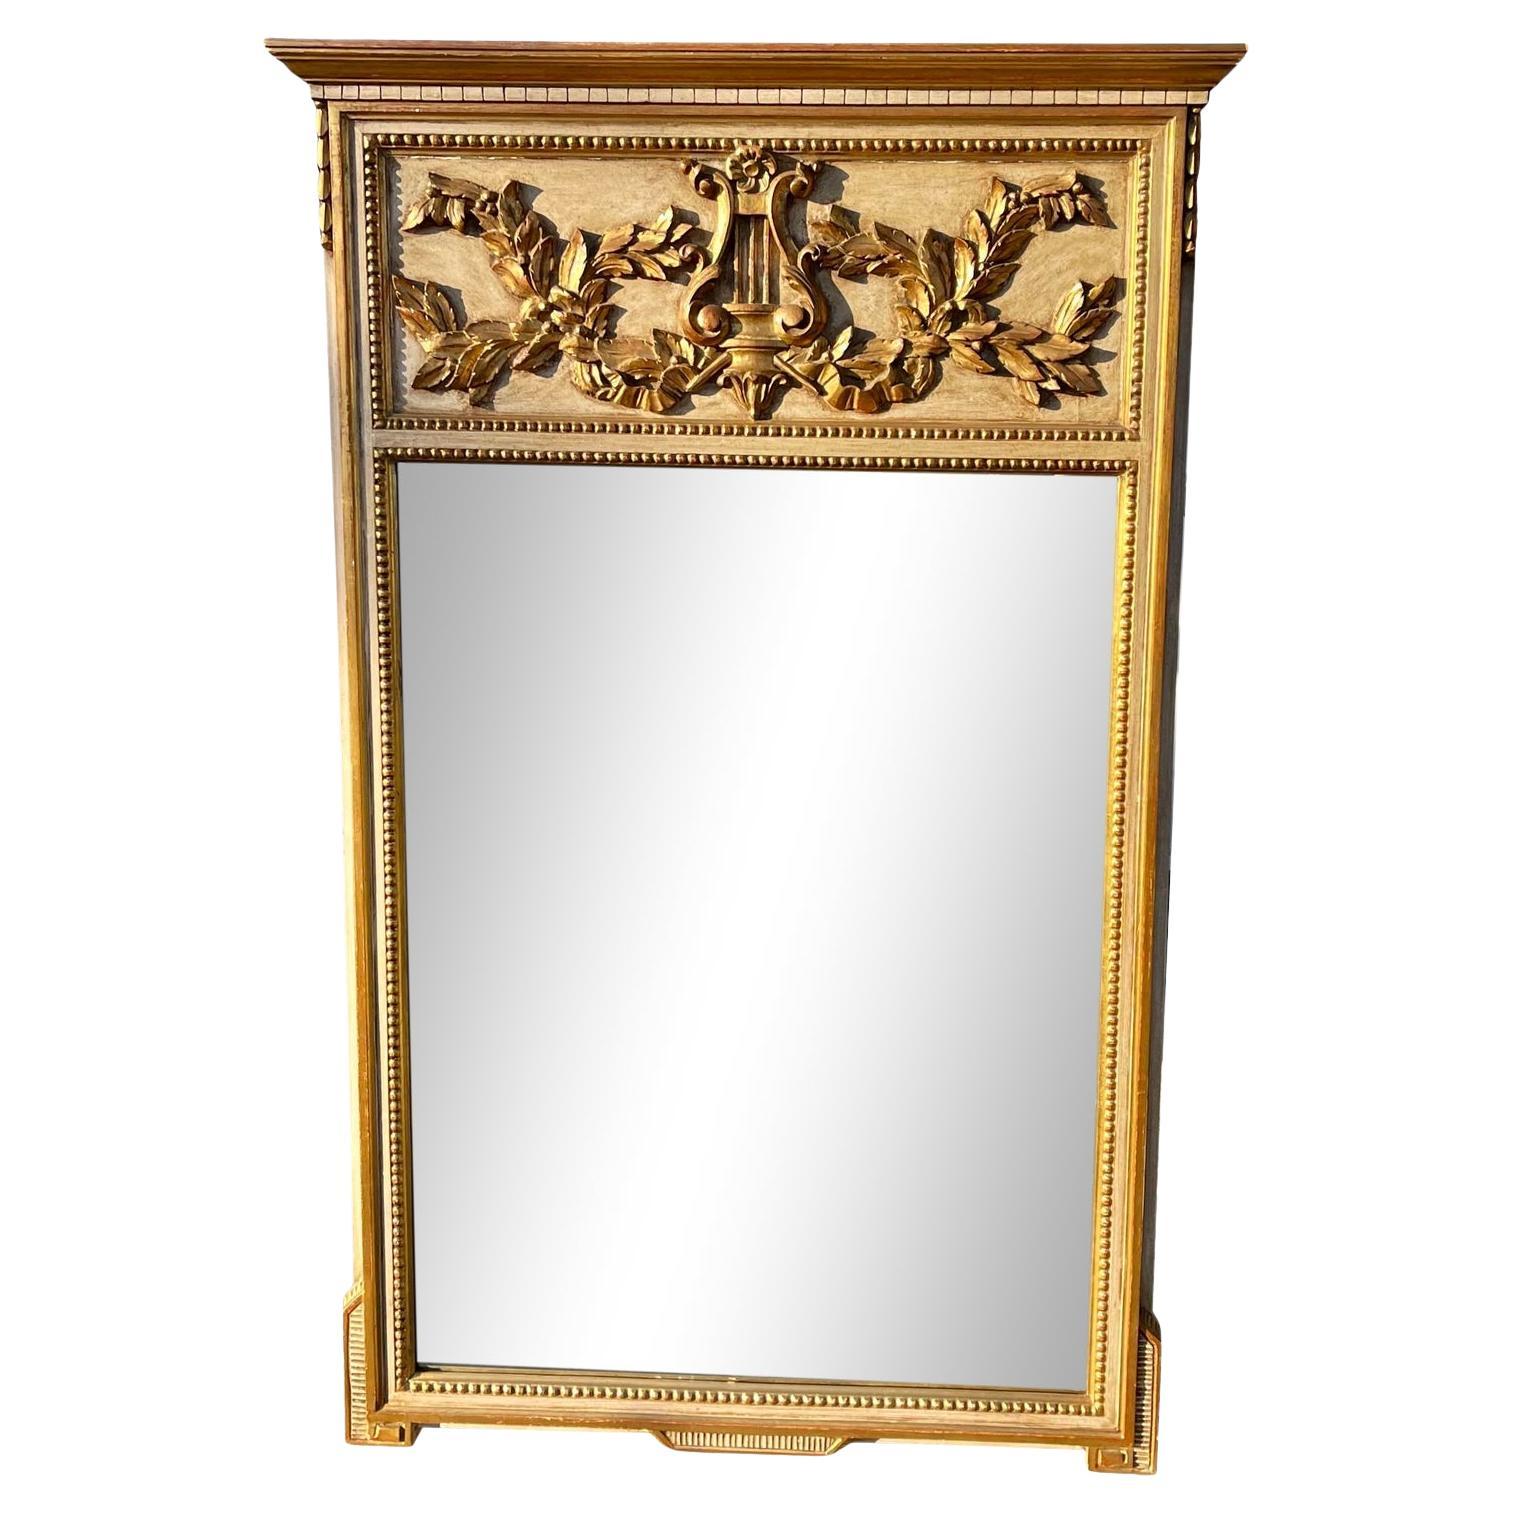 Vintage Hollywood Regency Italian Giltwood Mirror, Early 20th Century For Sale